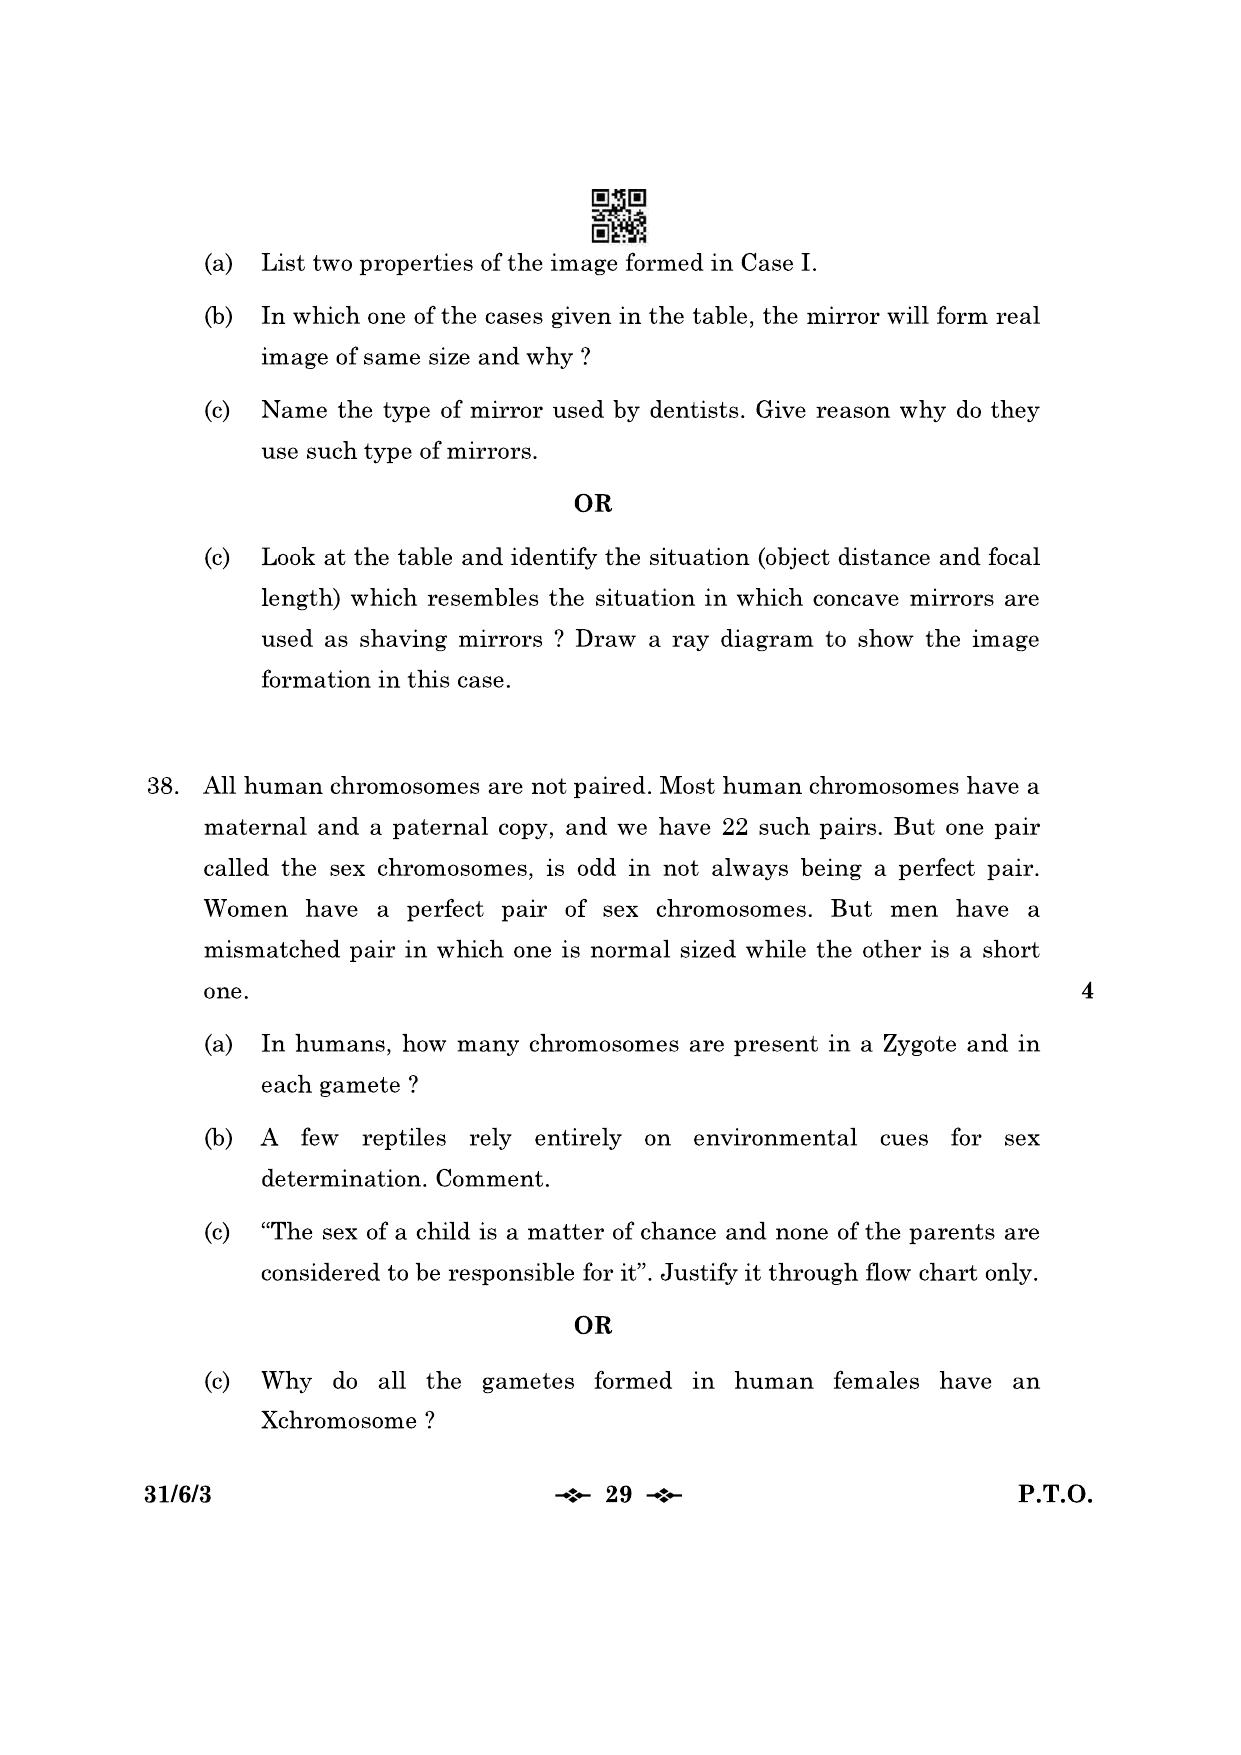 CBSE Class 10 31-6-3 Science 2023 Question Paper - Page 29